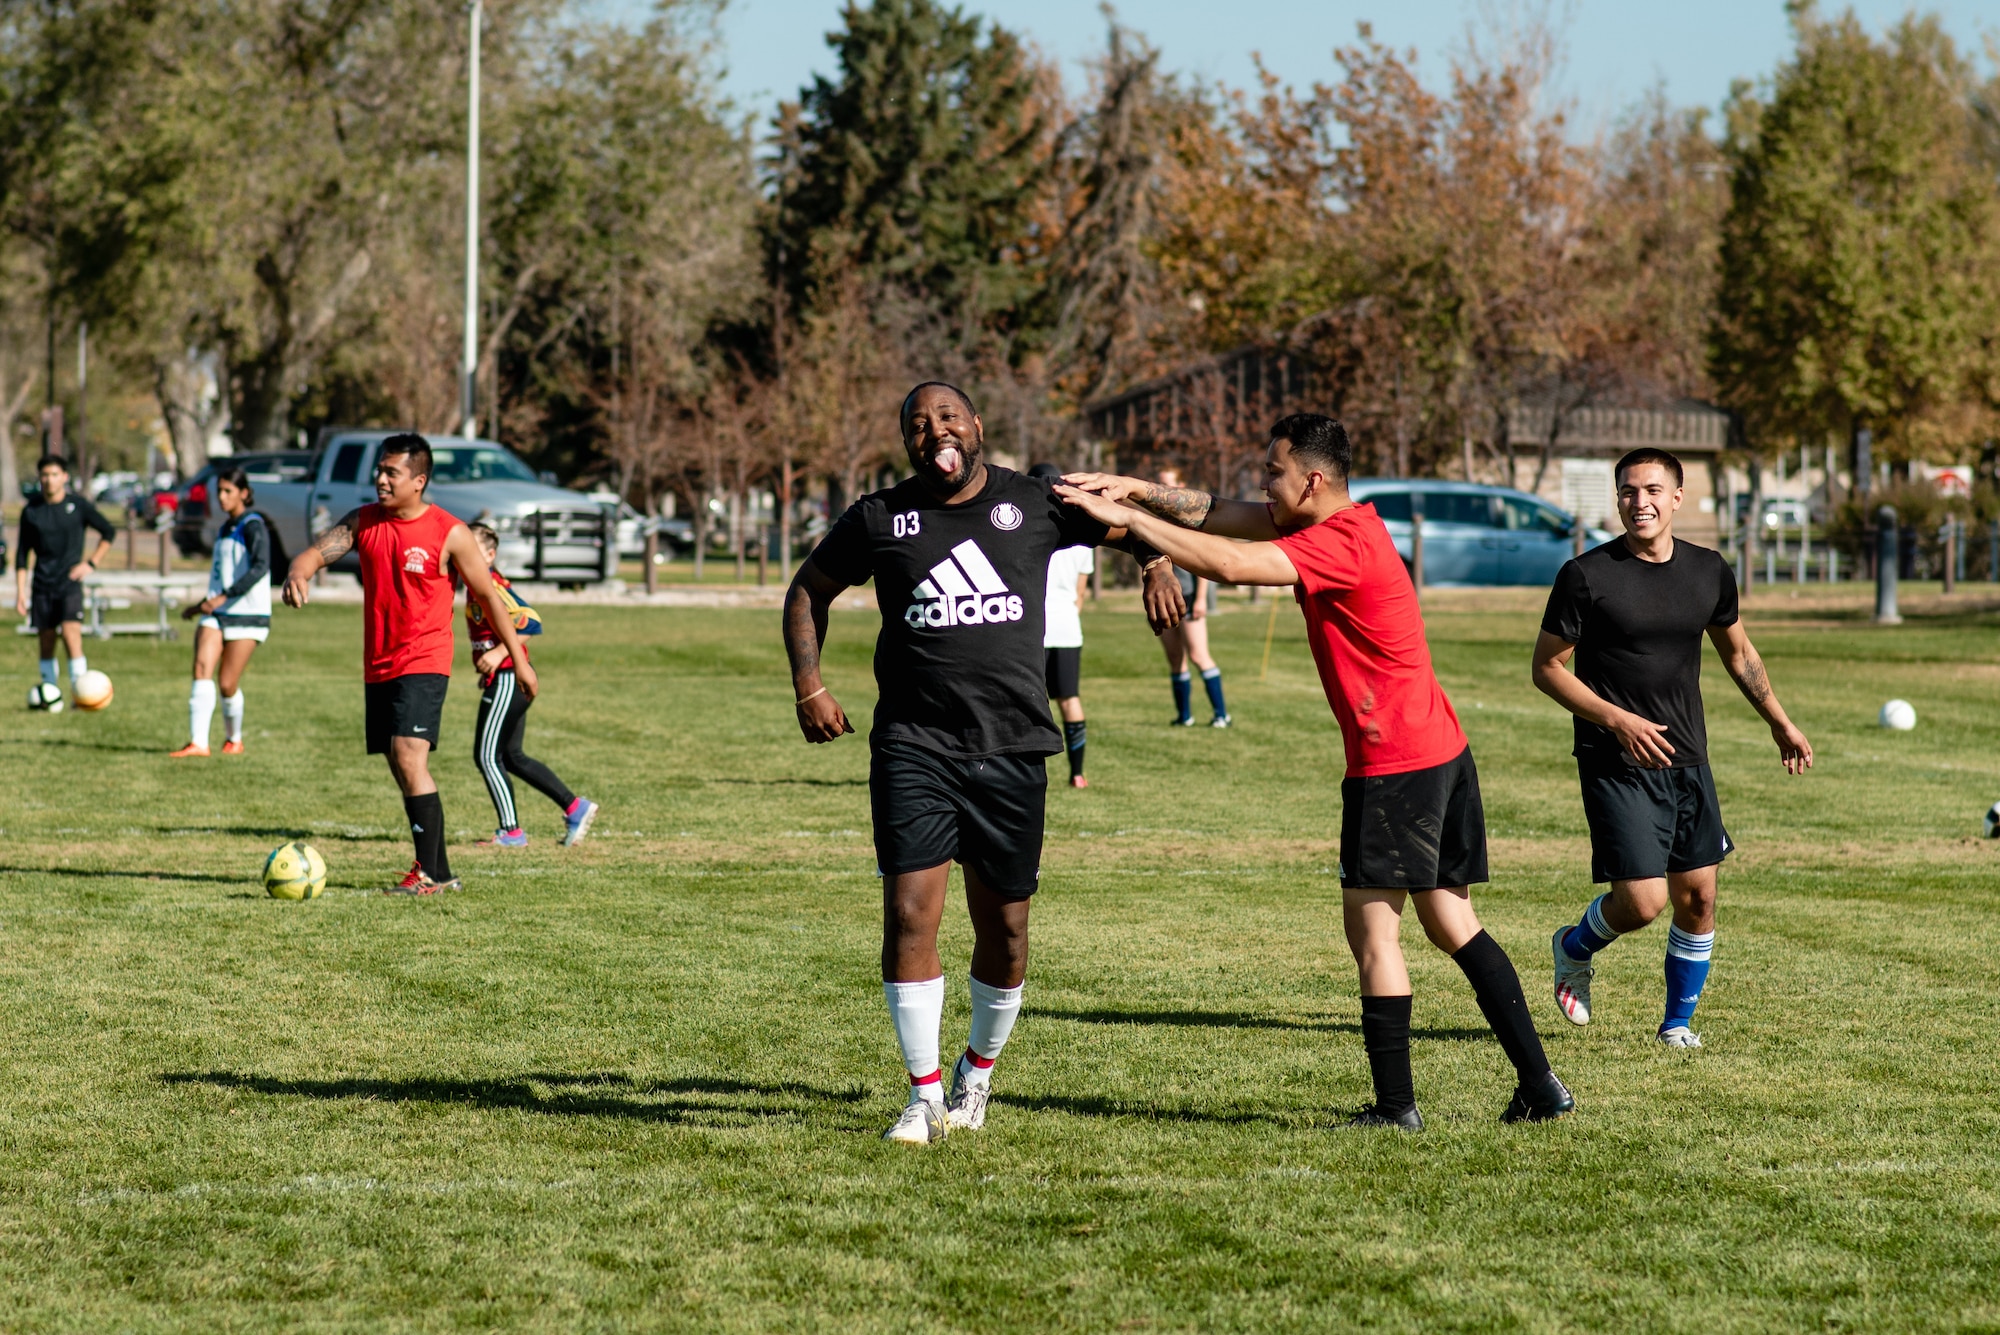 Several soccer players wearing black shirts and red shirts on the soccer field